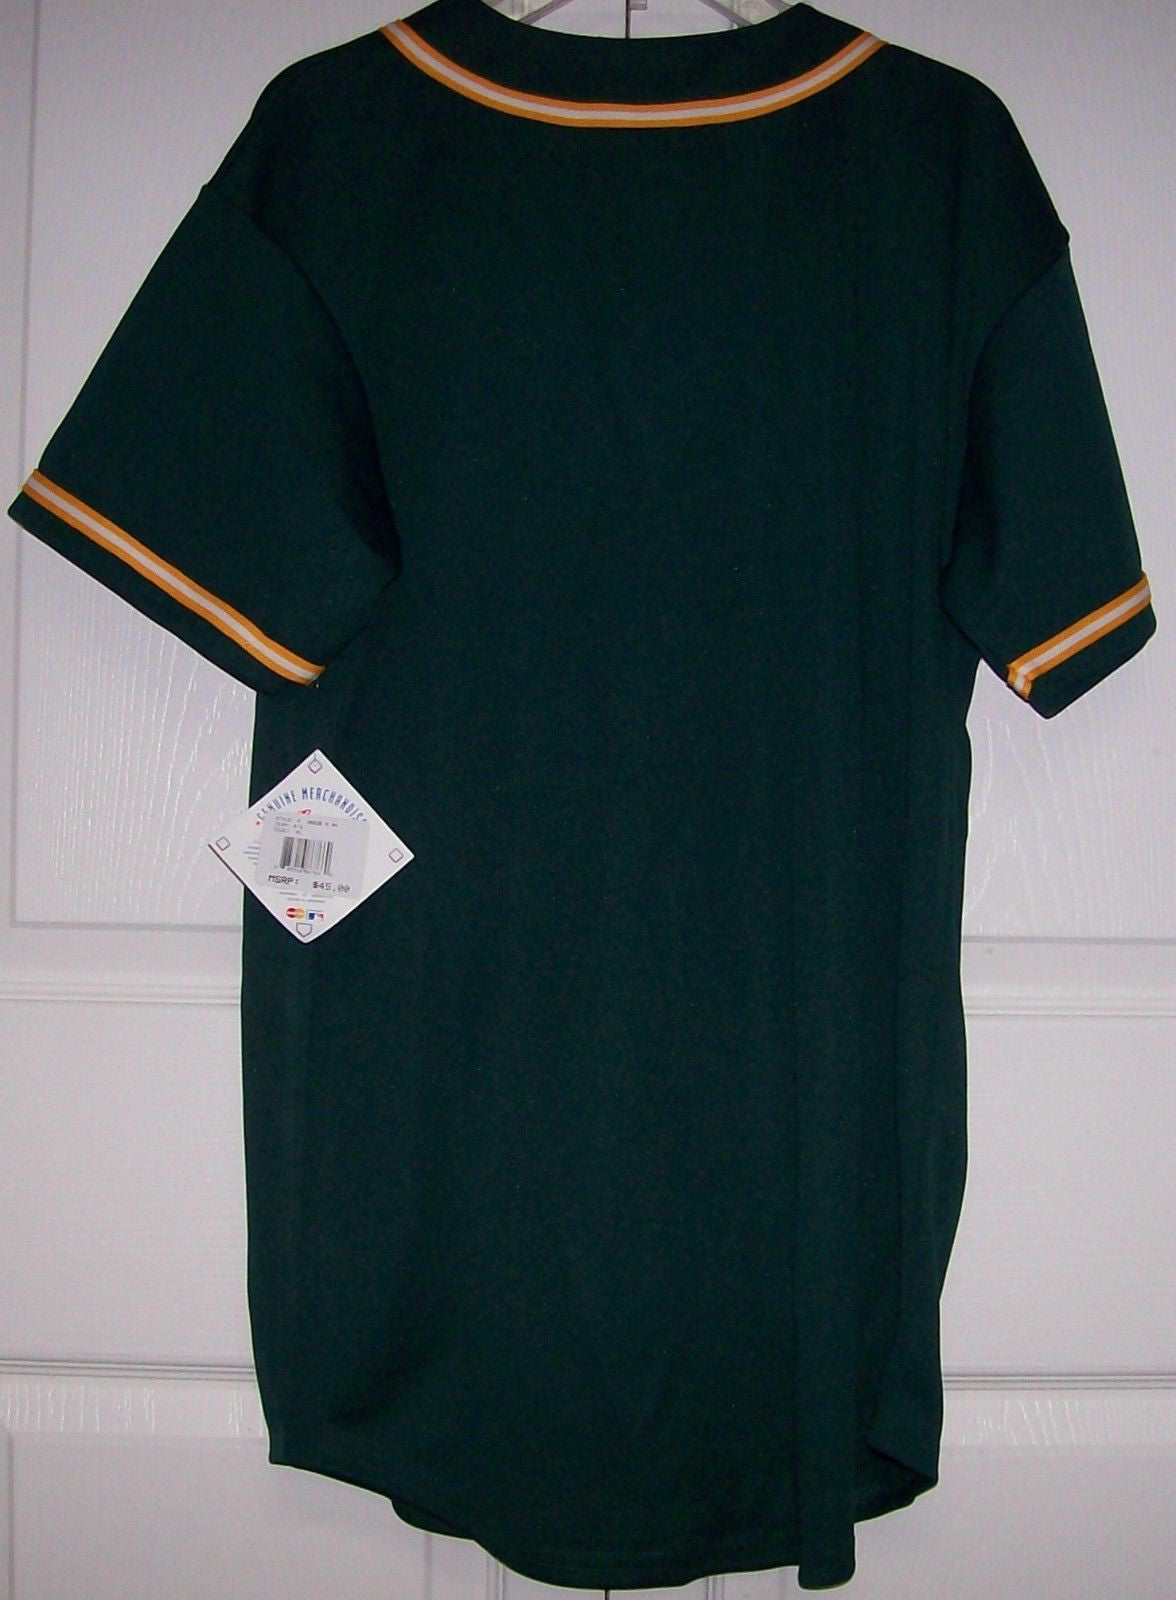 Oakland Athletics A’s Majestic Jersey Youth Small New Without Tags